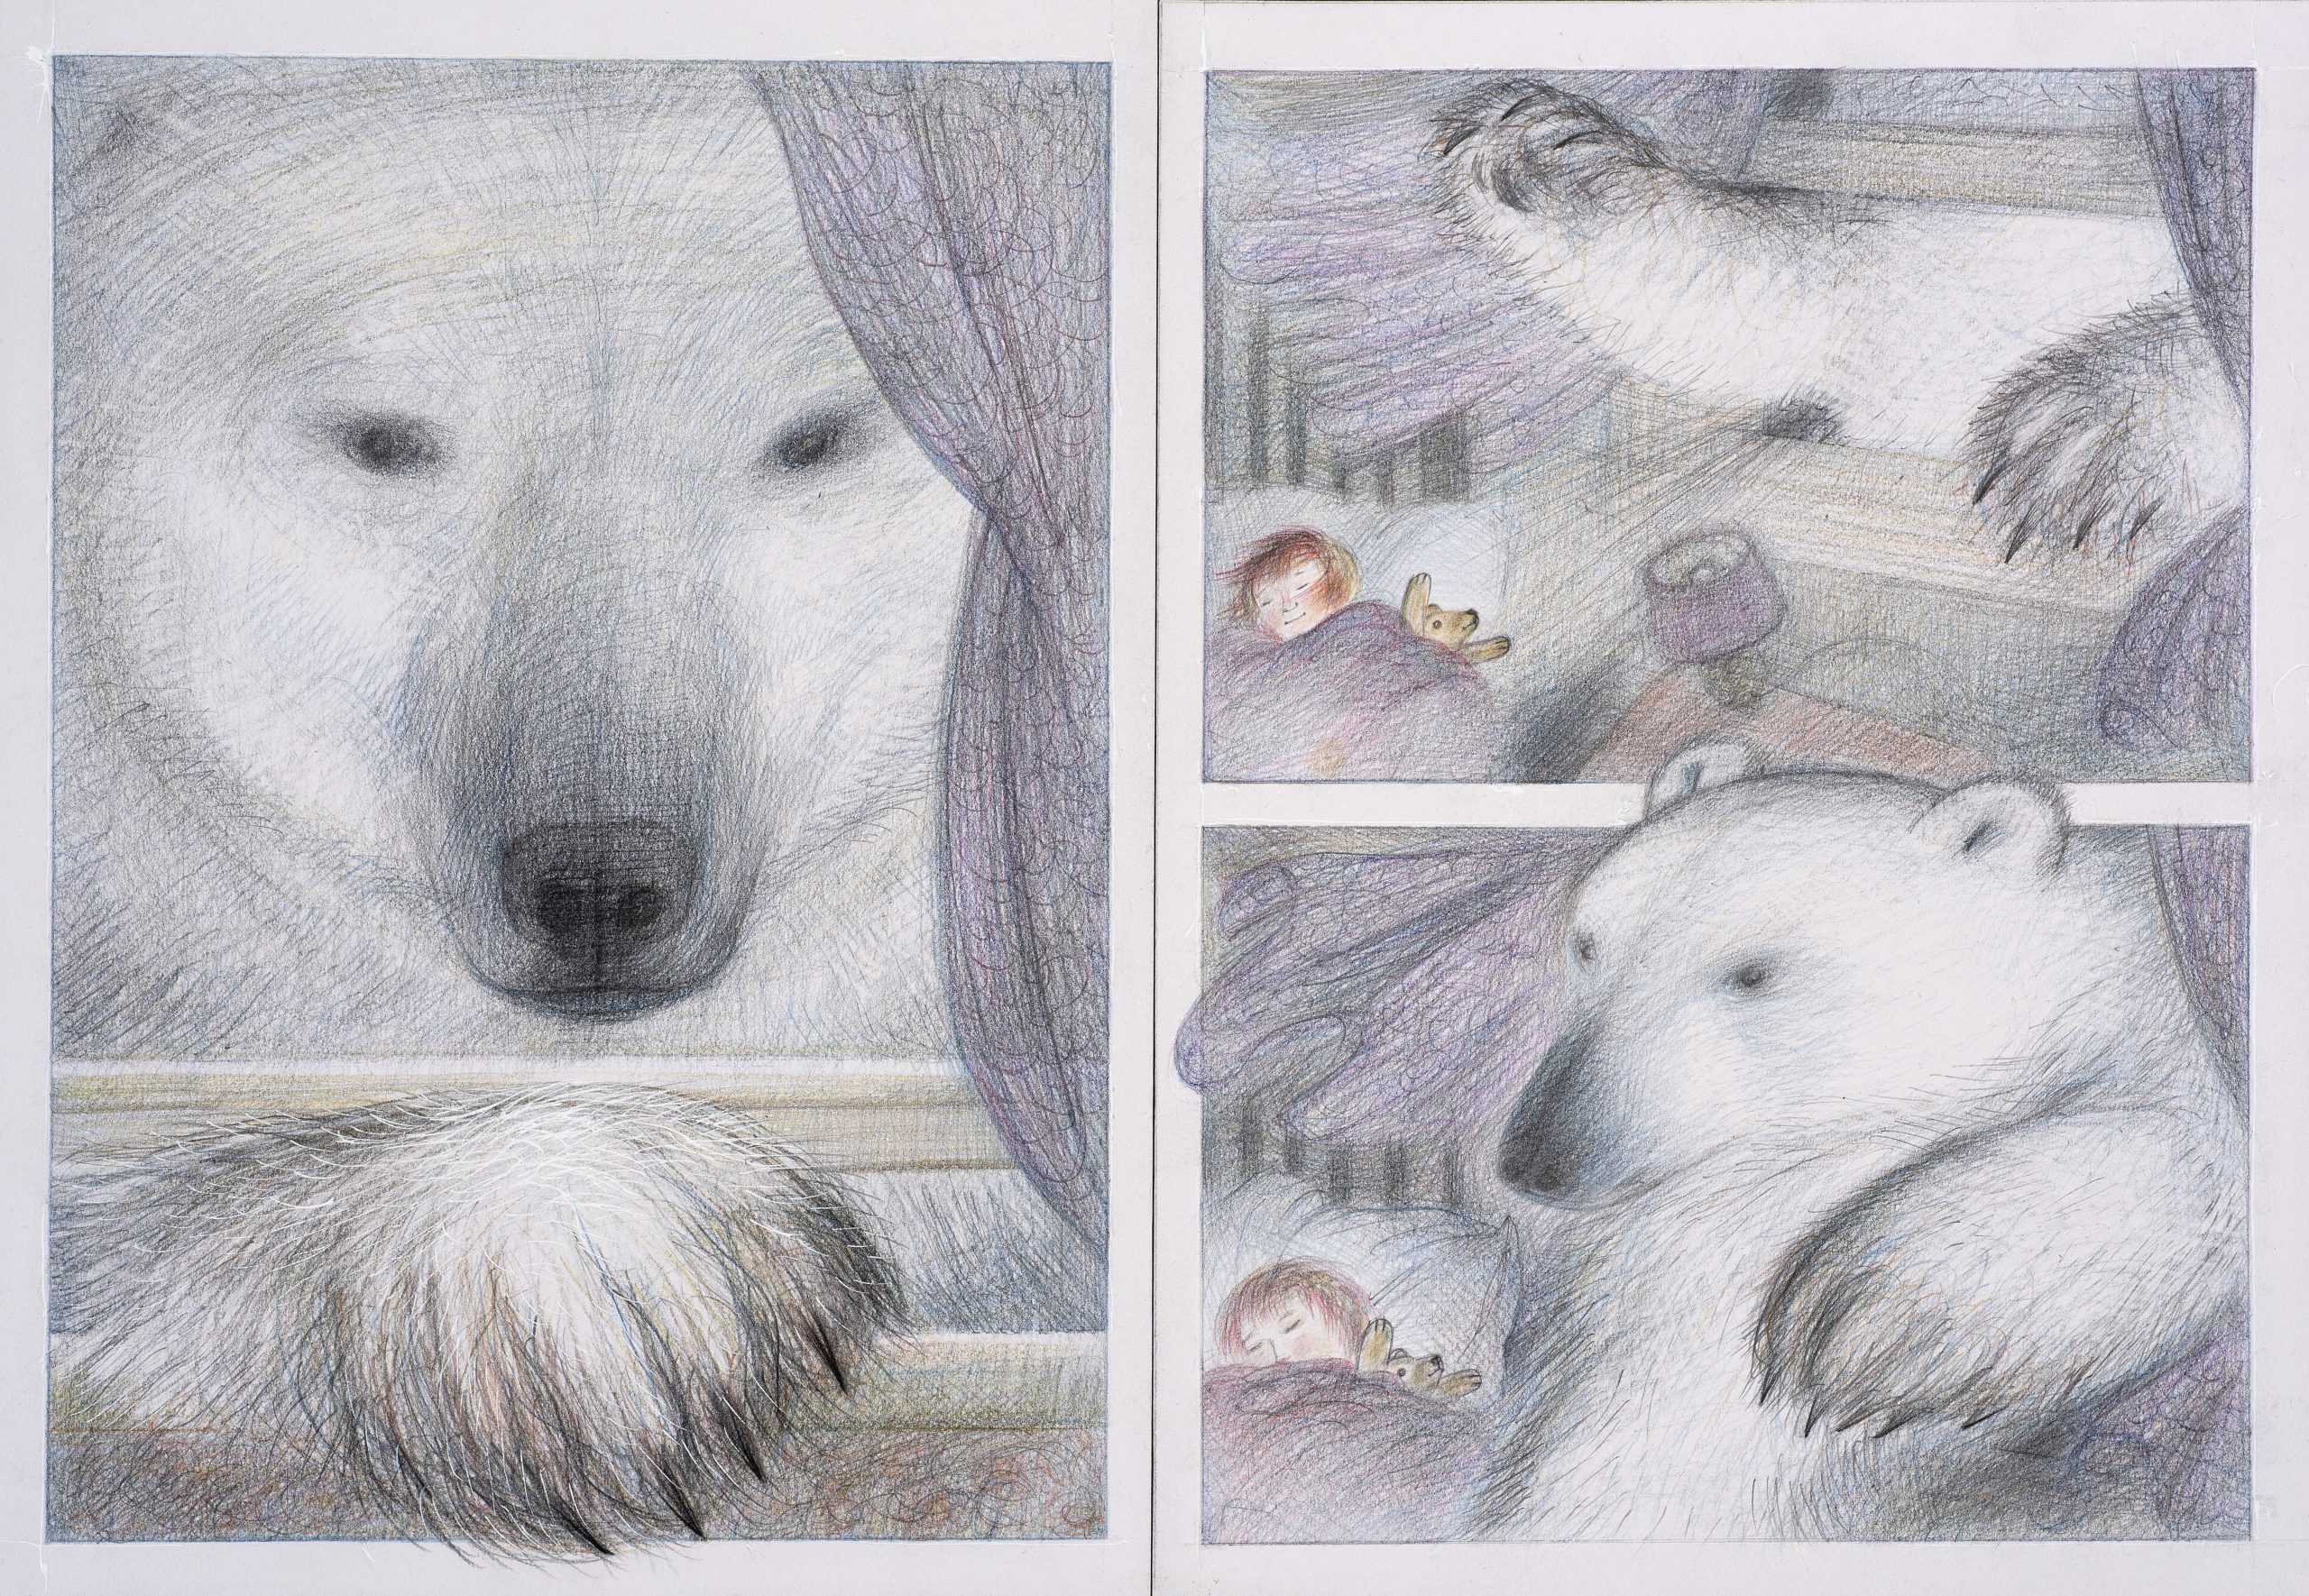 New exhibition on life and works of Raymond Briggs